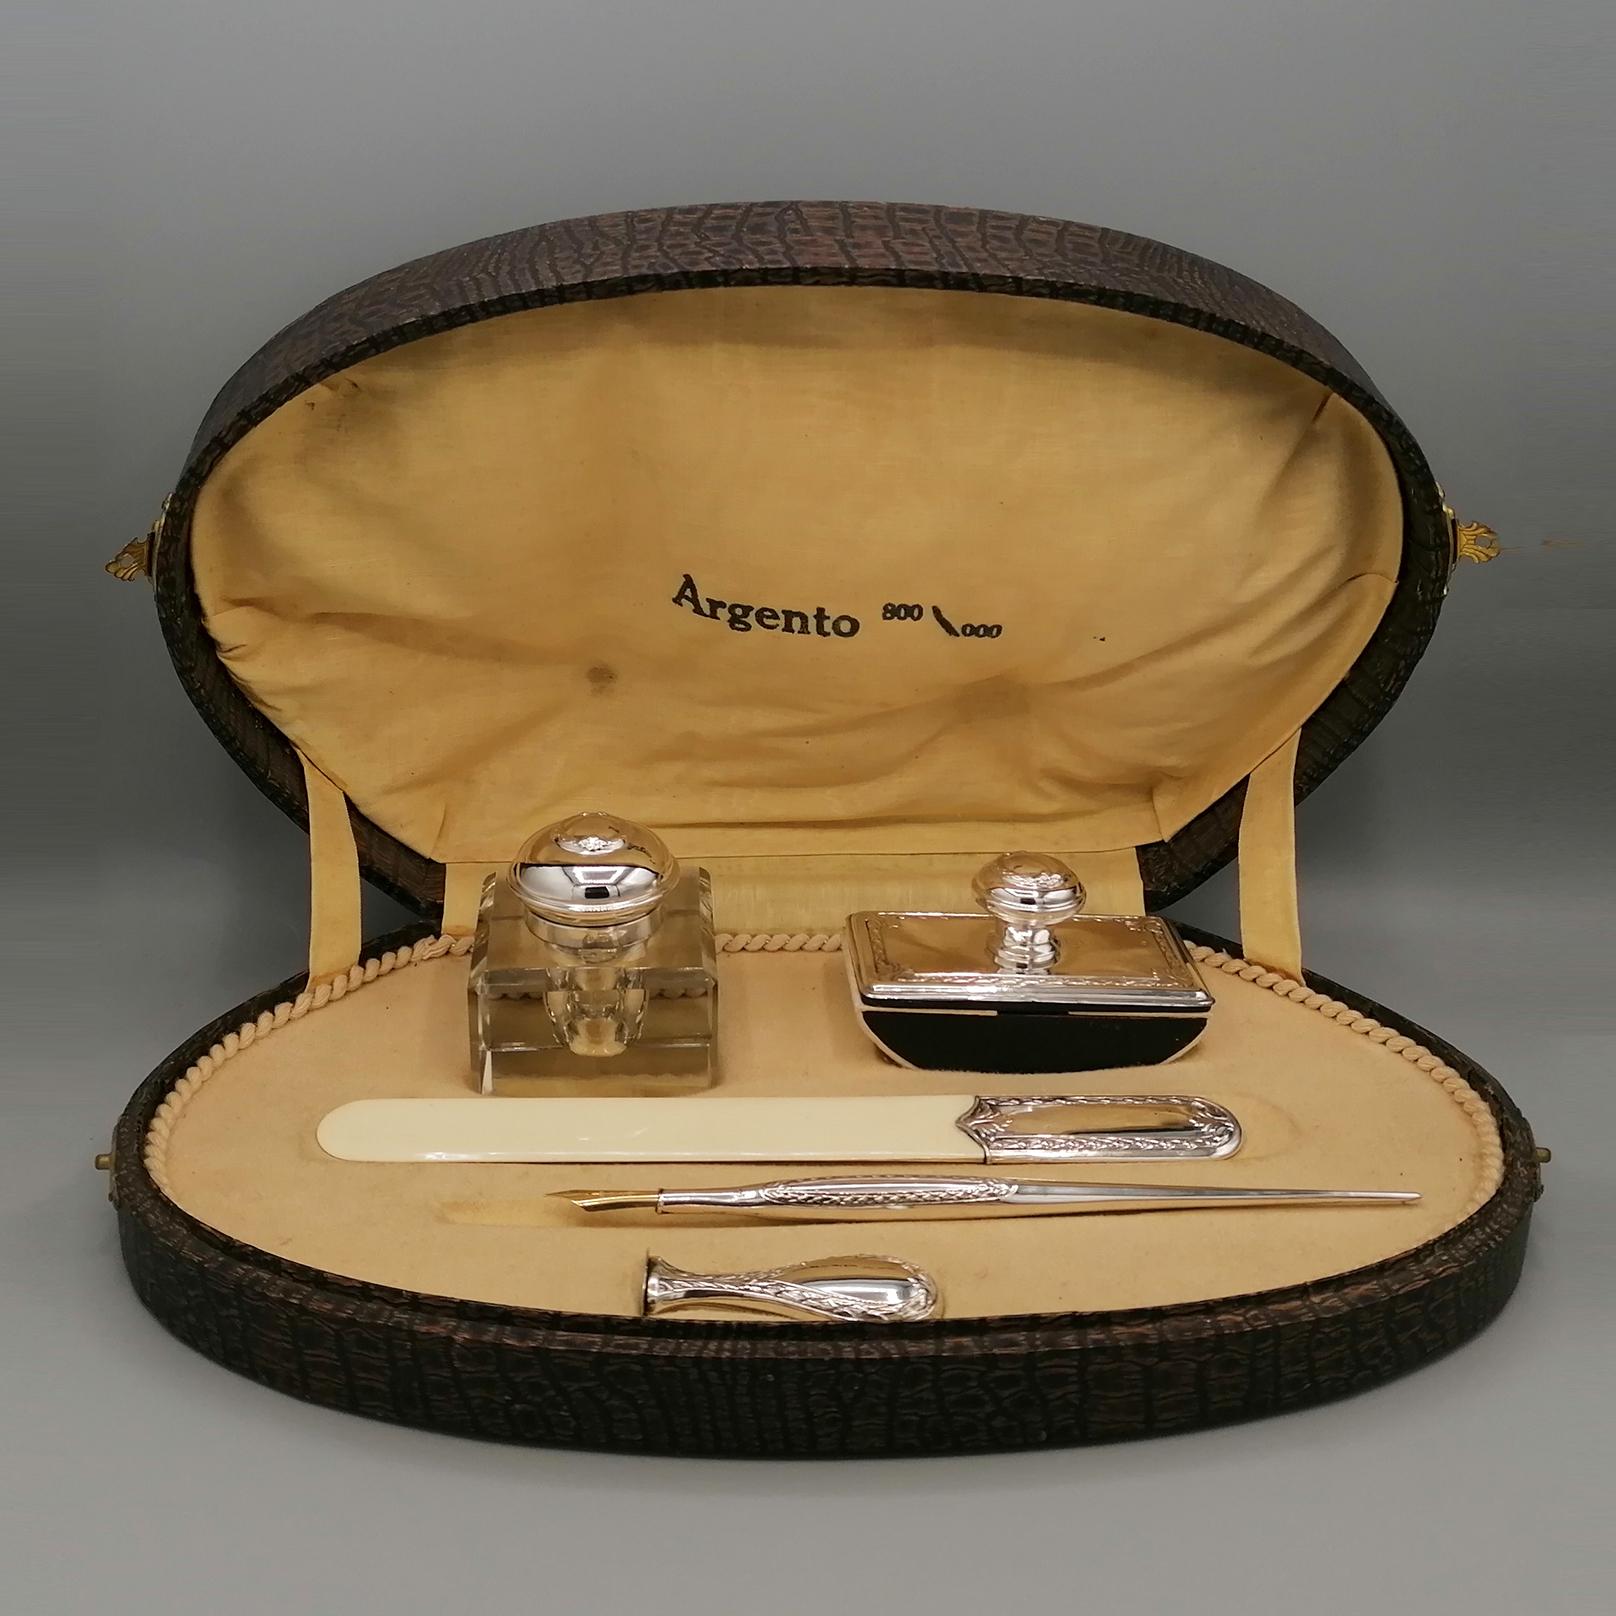 Italian desk set in 800/1000 silver late 1800s. 
The set consists of:
Square-shaped ground crystal inkwell with hinged silver lid and 24kt gold finish inside .
Rectangular pad with silver knob and plaque.
Letter opener in with silver handle
Pen with